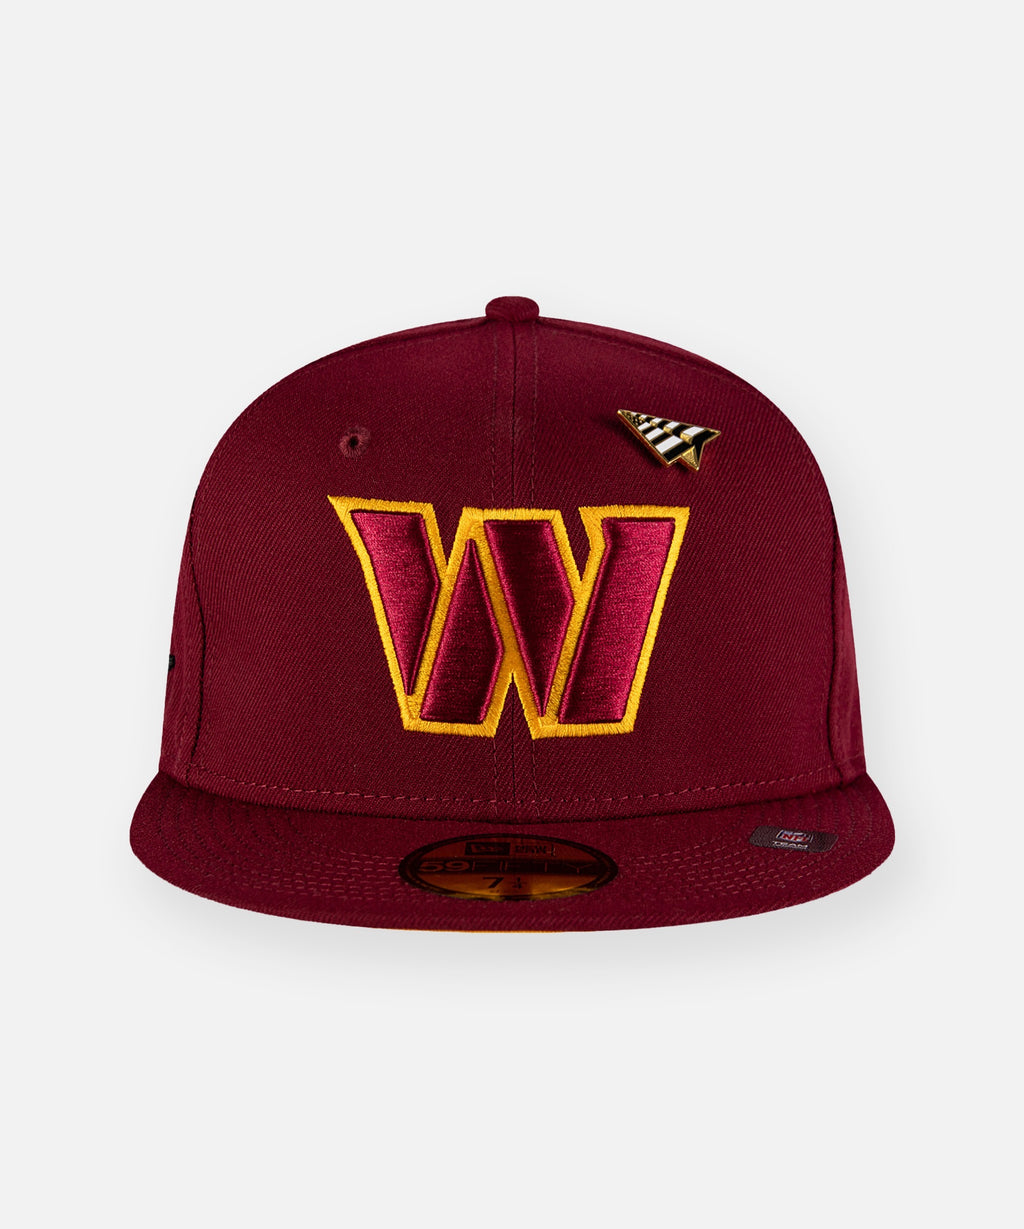 Paper Planes x Washington Commanders Team Color 59Fifty Fitted Hat_For Men_1